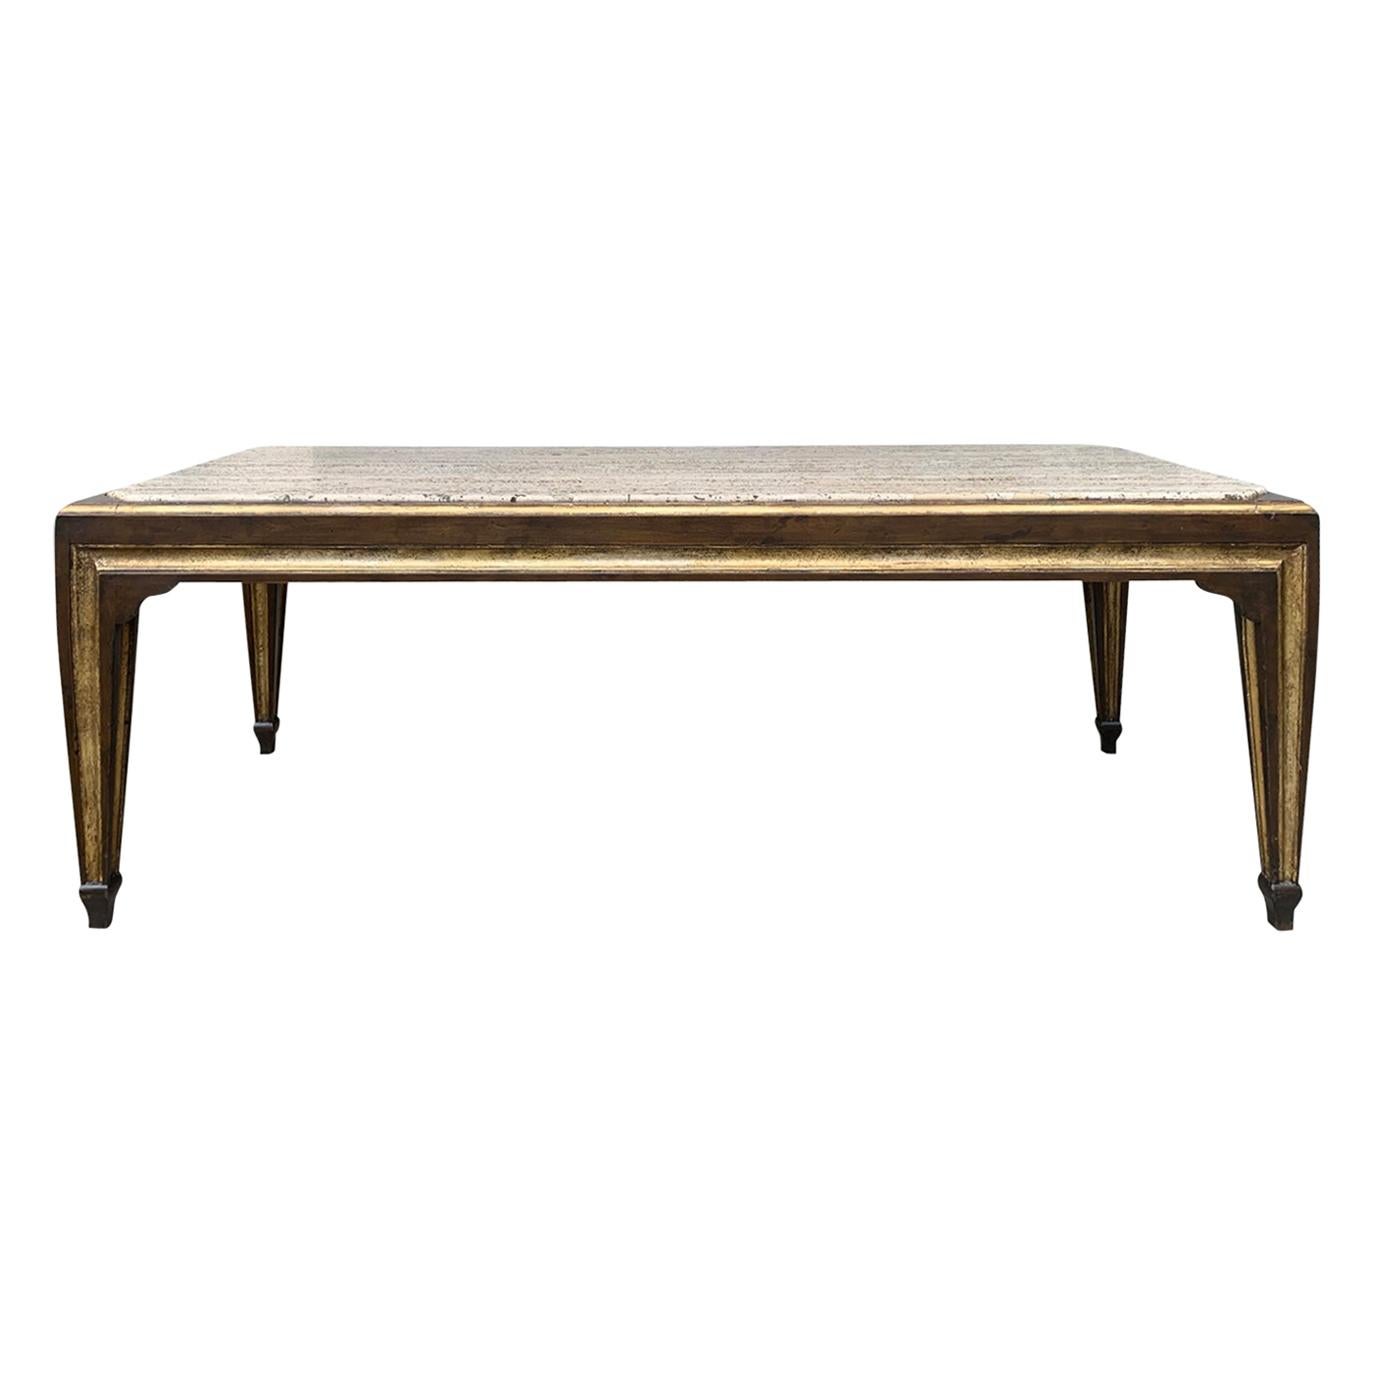 Max Kuehne Style Continental Gilt & Black Coffee Table, Inset Coquina Stone Top For Sale